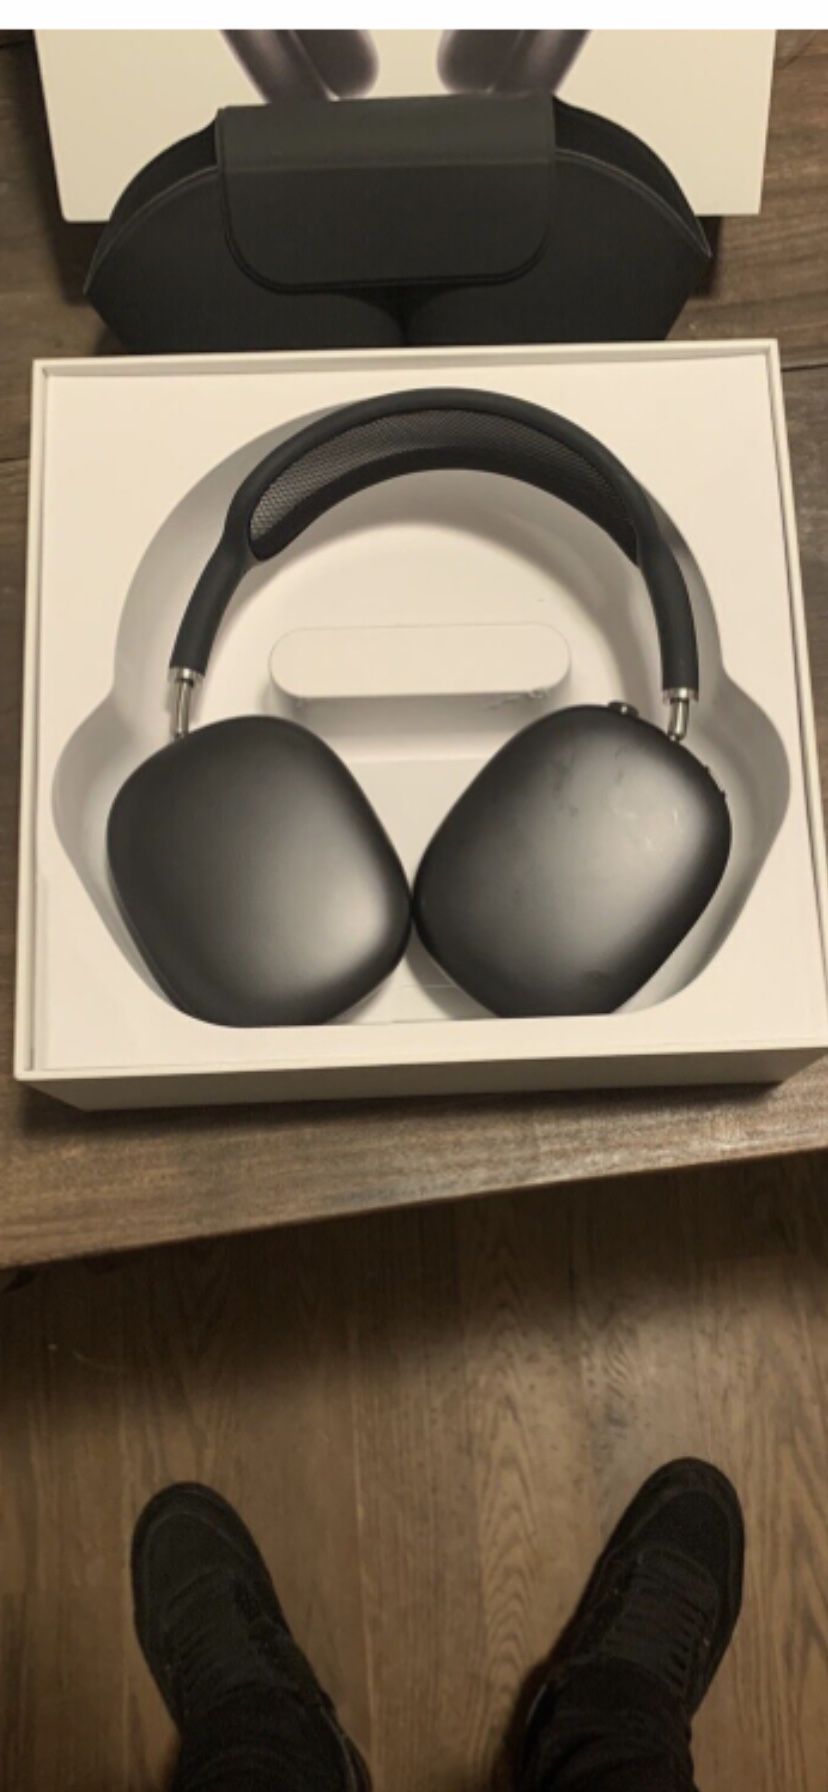 *BEST OFFER* AirPod Max Space Gray - BRAND NEW 